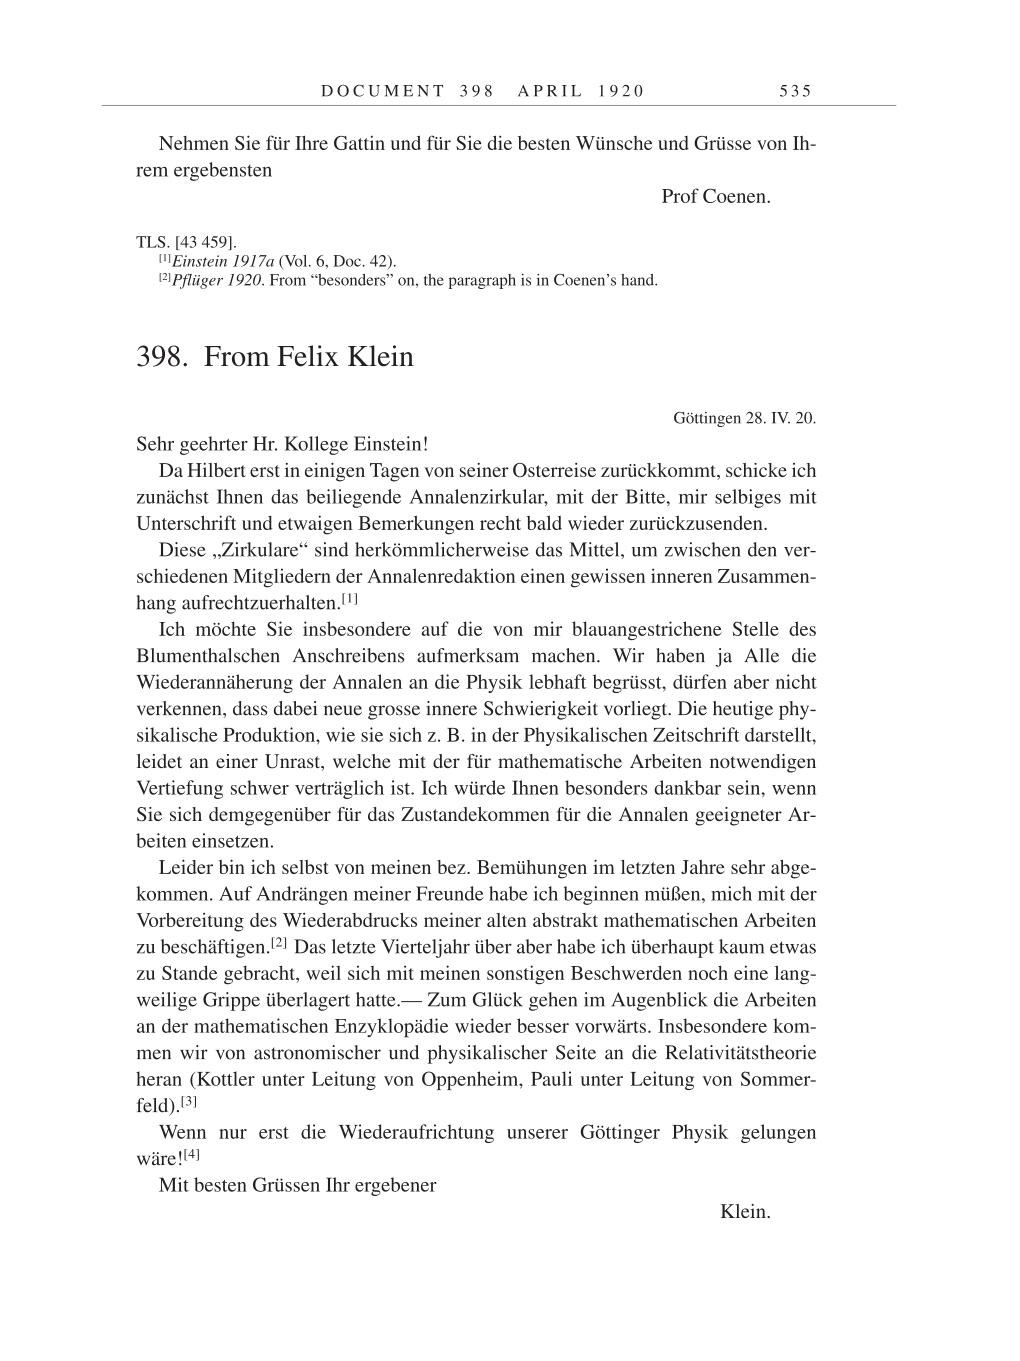 Volume 9: The Berlin Years: Correspondence January 1919-April 1920 page 535